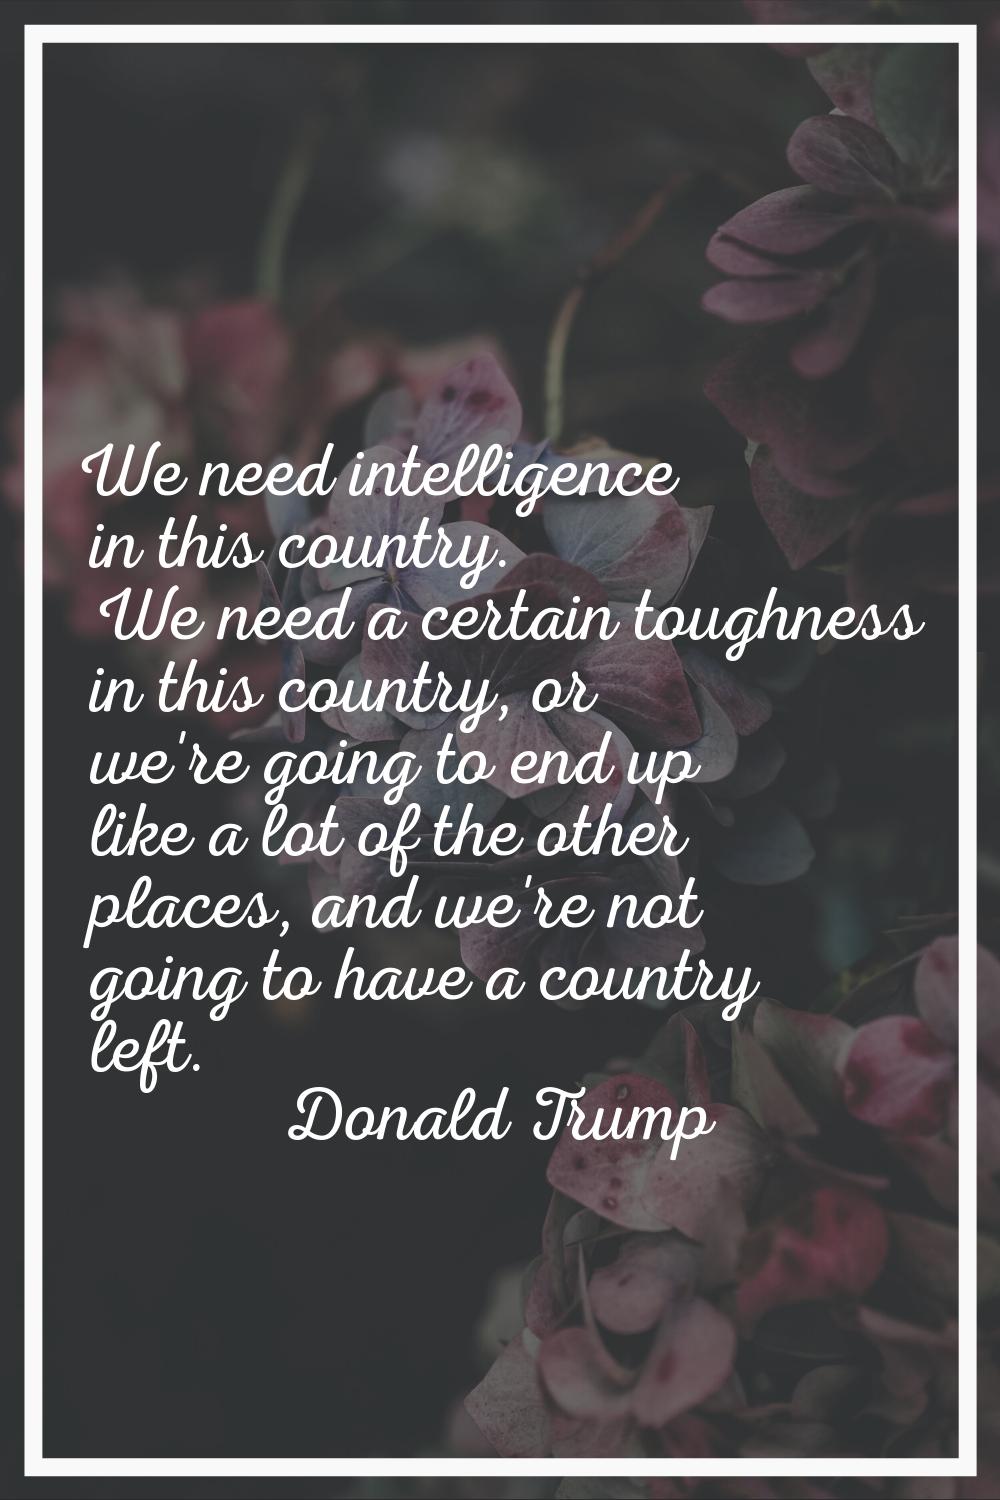 We need intelligence in this country. We need a certain toughness in this country, or we're going t